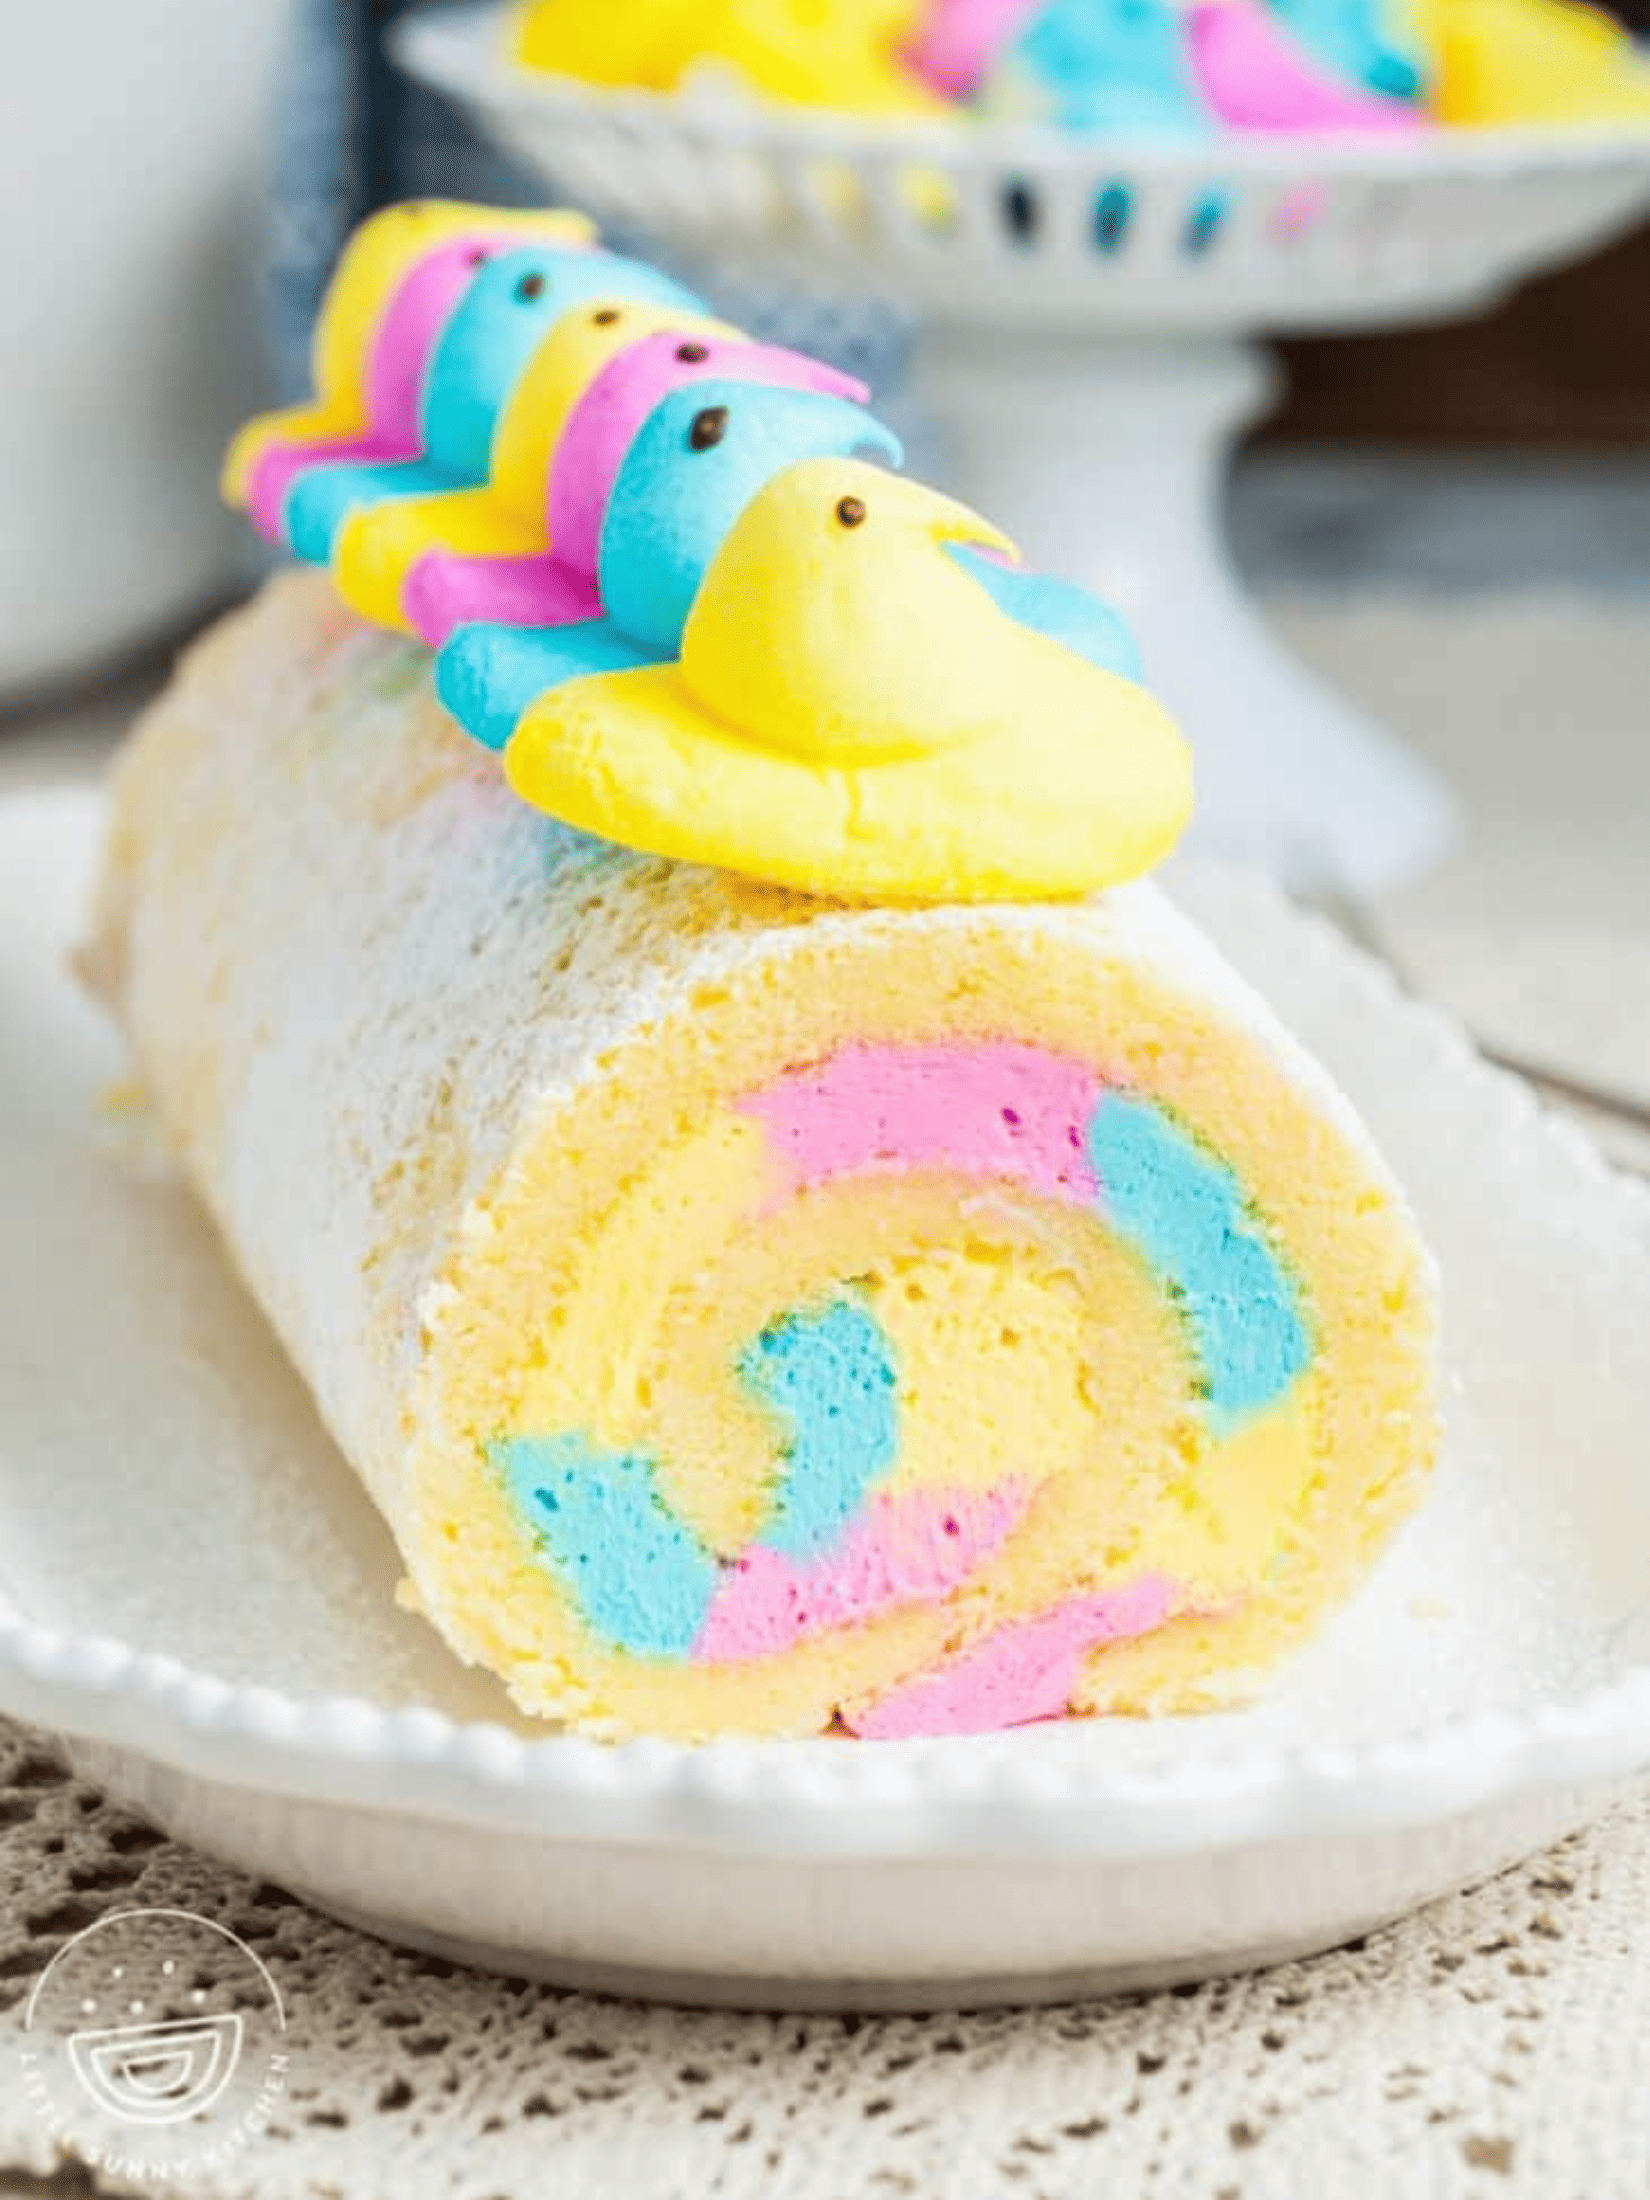 delicious Easter cake roll with pastel-colored frosting, adorned with festive decorations.